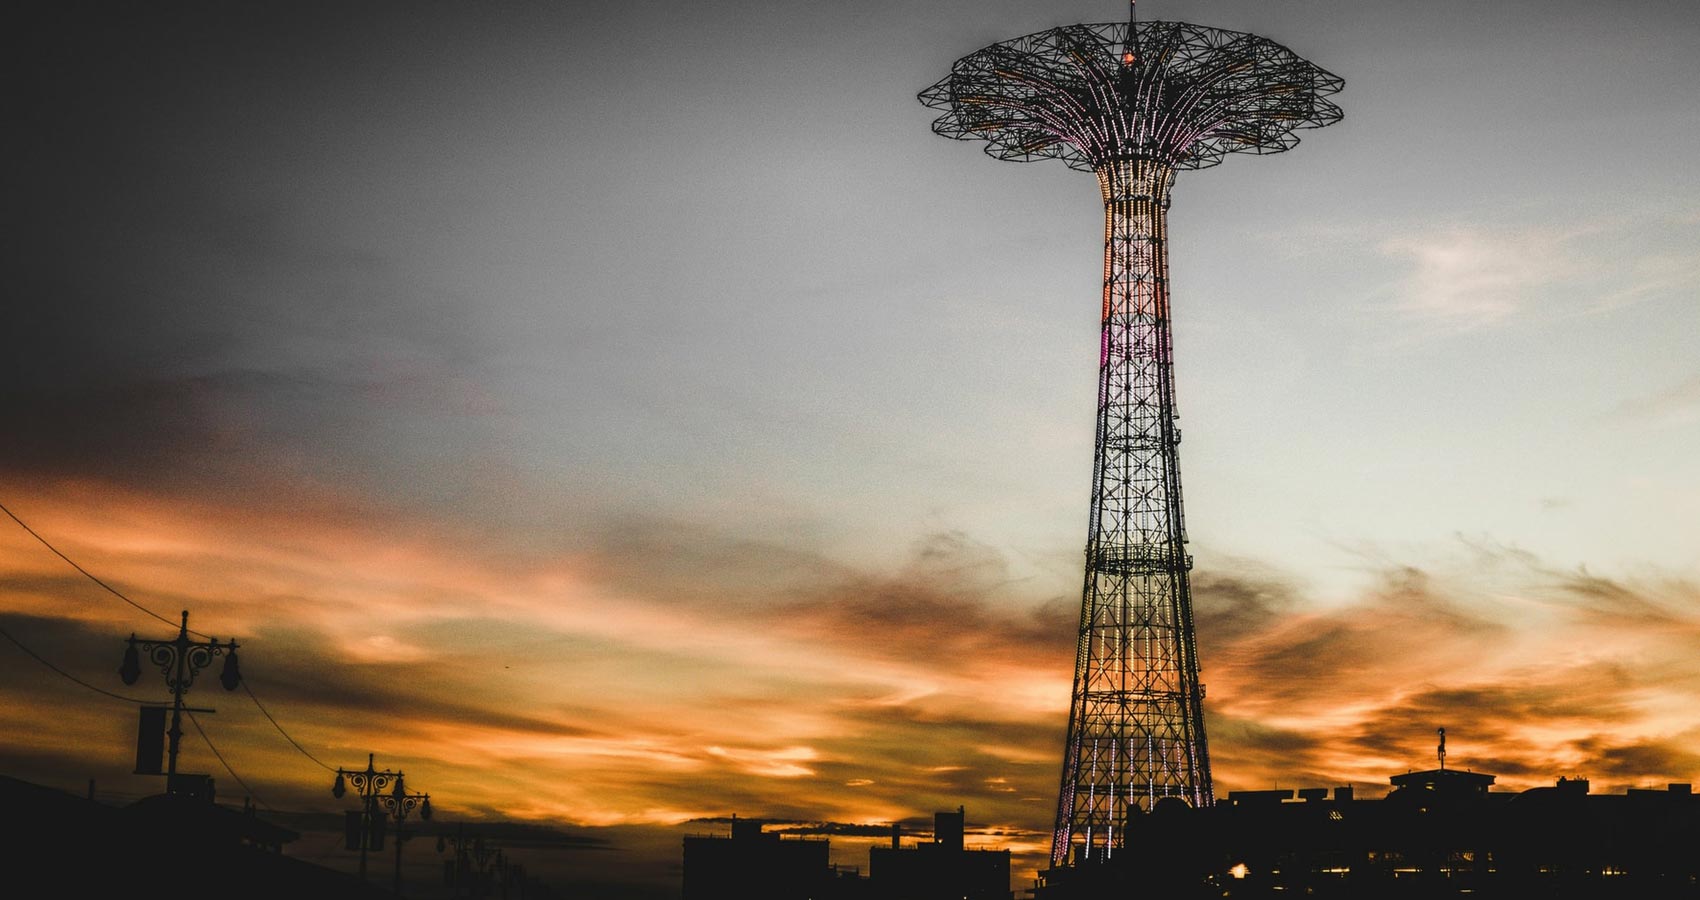 Coney Island, a poem written by Sara Teasdale at Spillwords.com